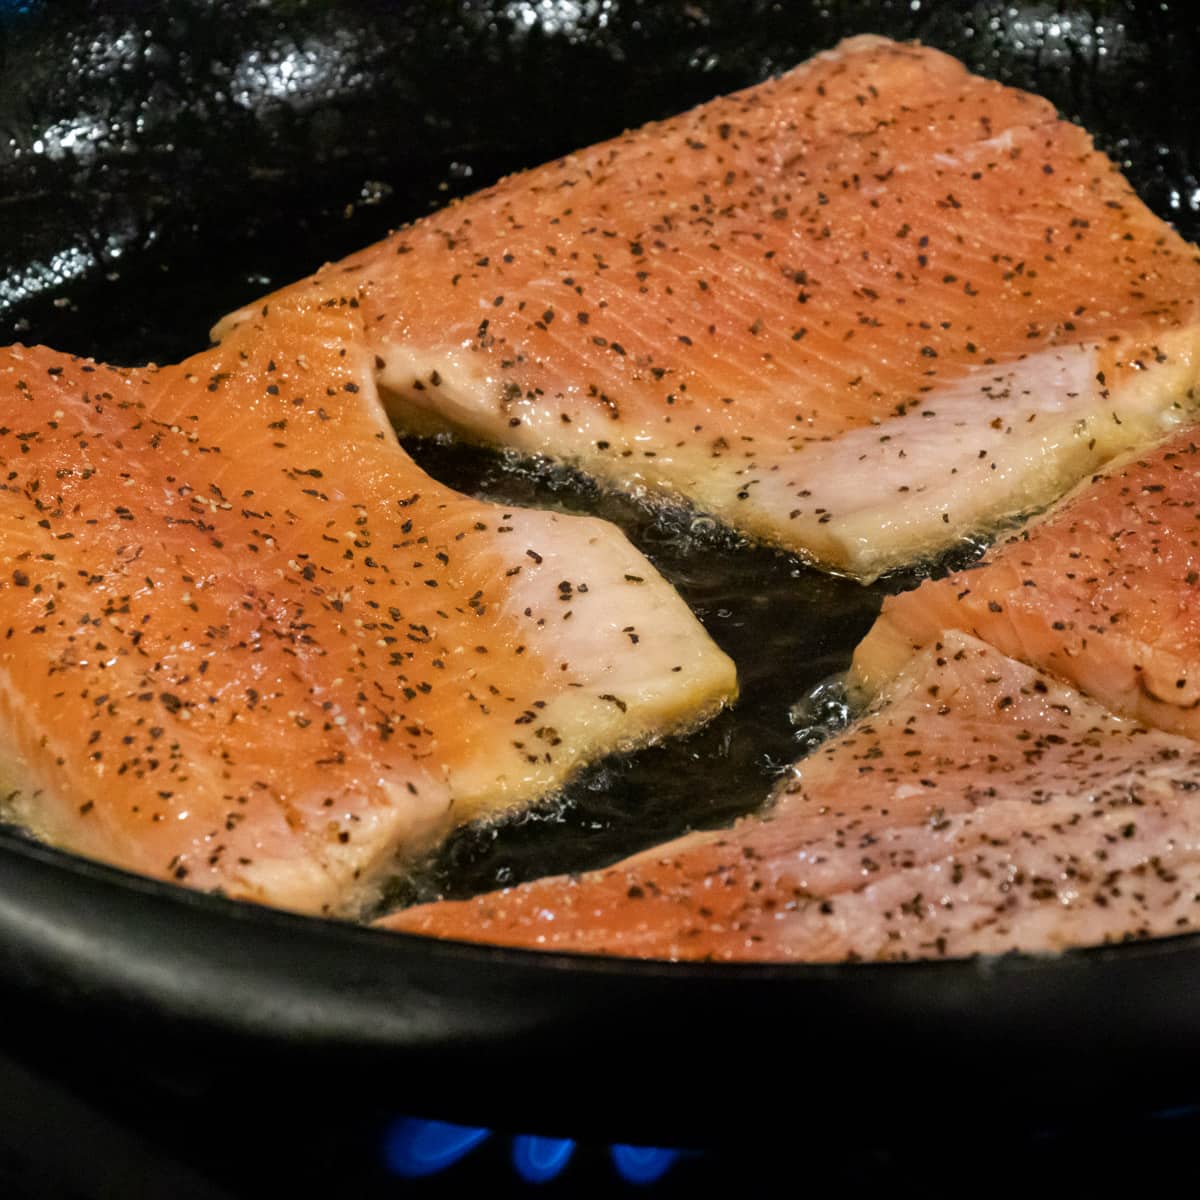 Raw fish in a skillet.